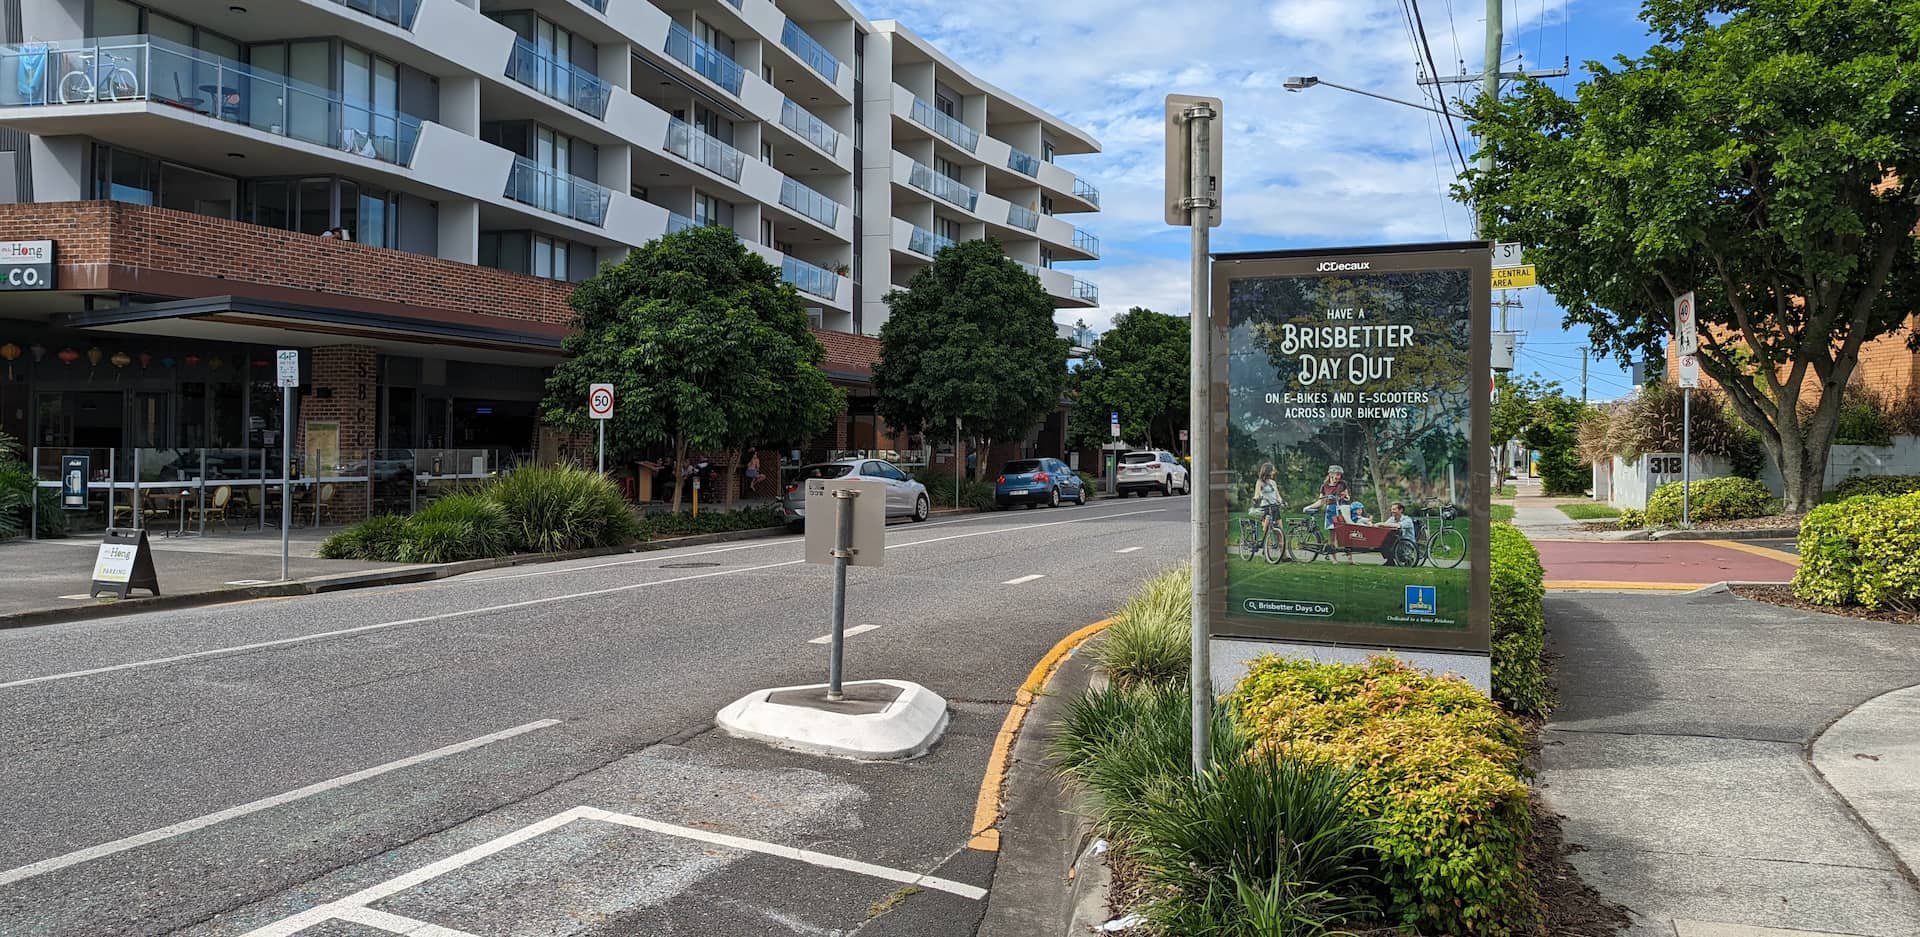 An old Citycycle parking spot turned into motorbike parking. A small billboard says "have a Bris-better day out on e0-bikes and e-scooters across out bikeways"